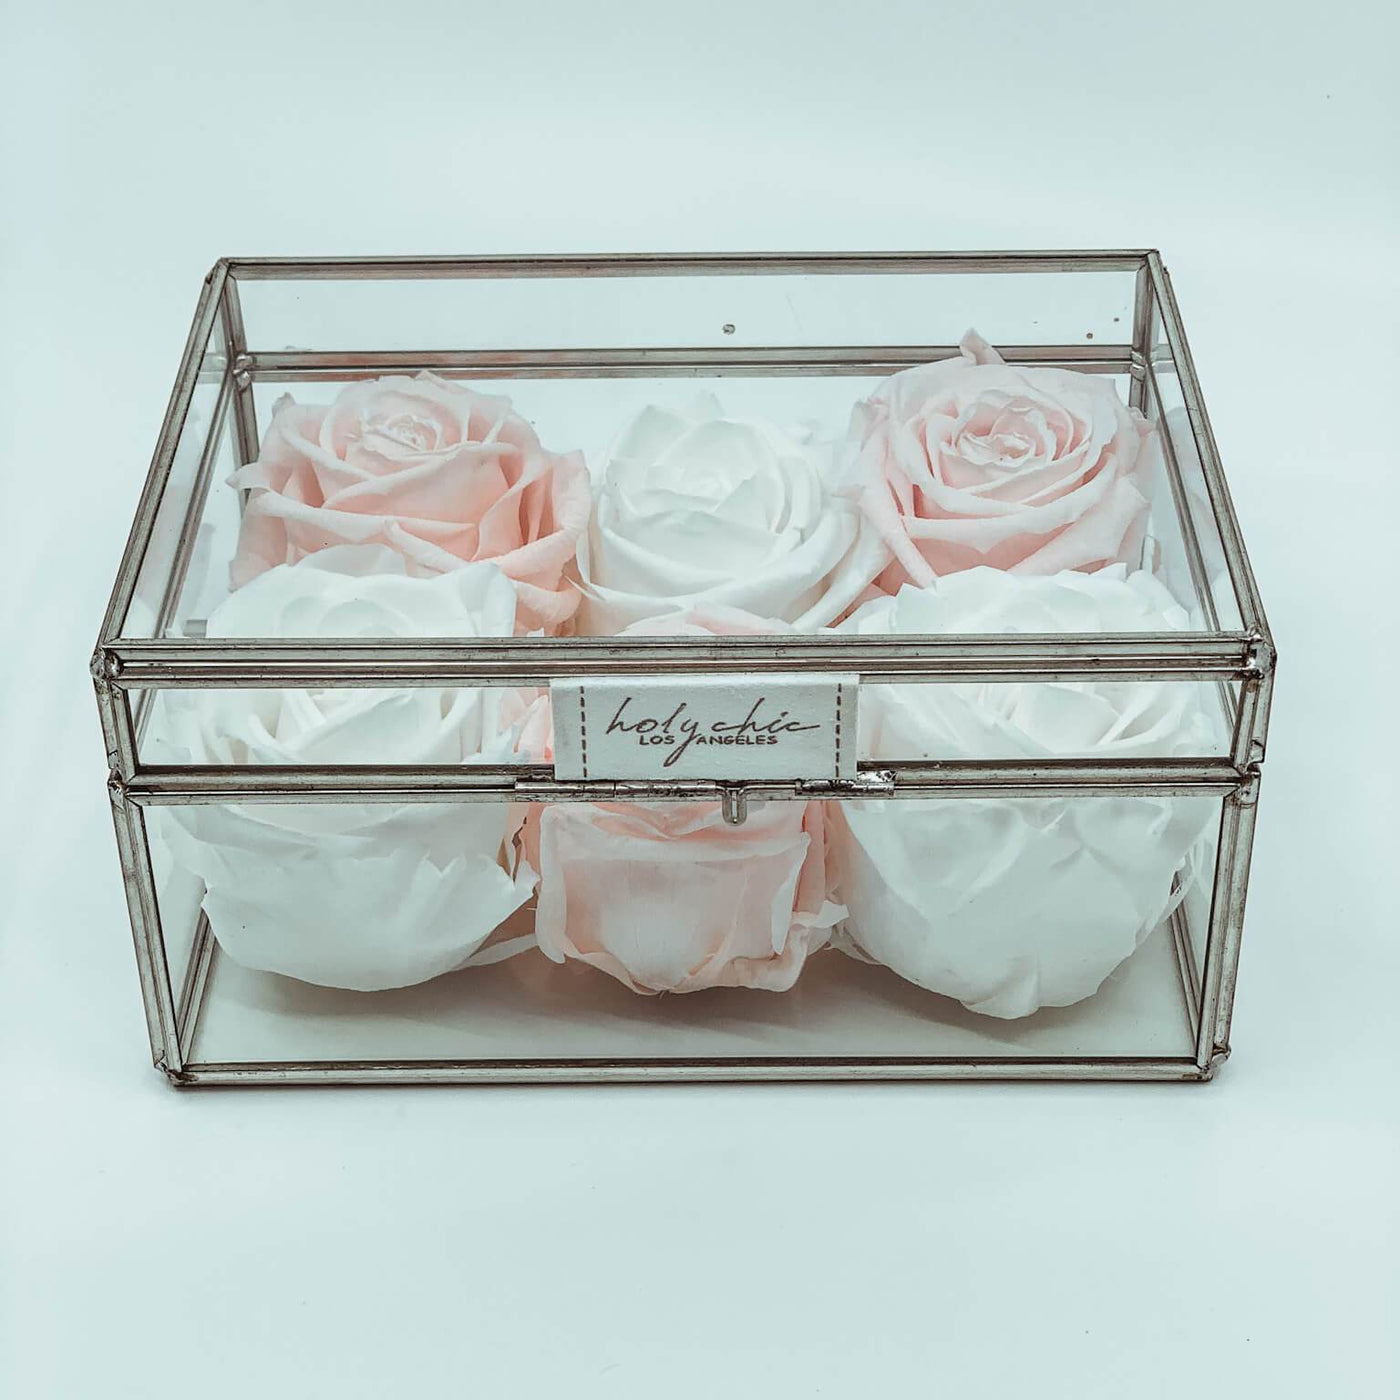 Forever roses set in a small clear glass jewelry box